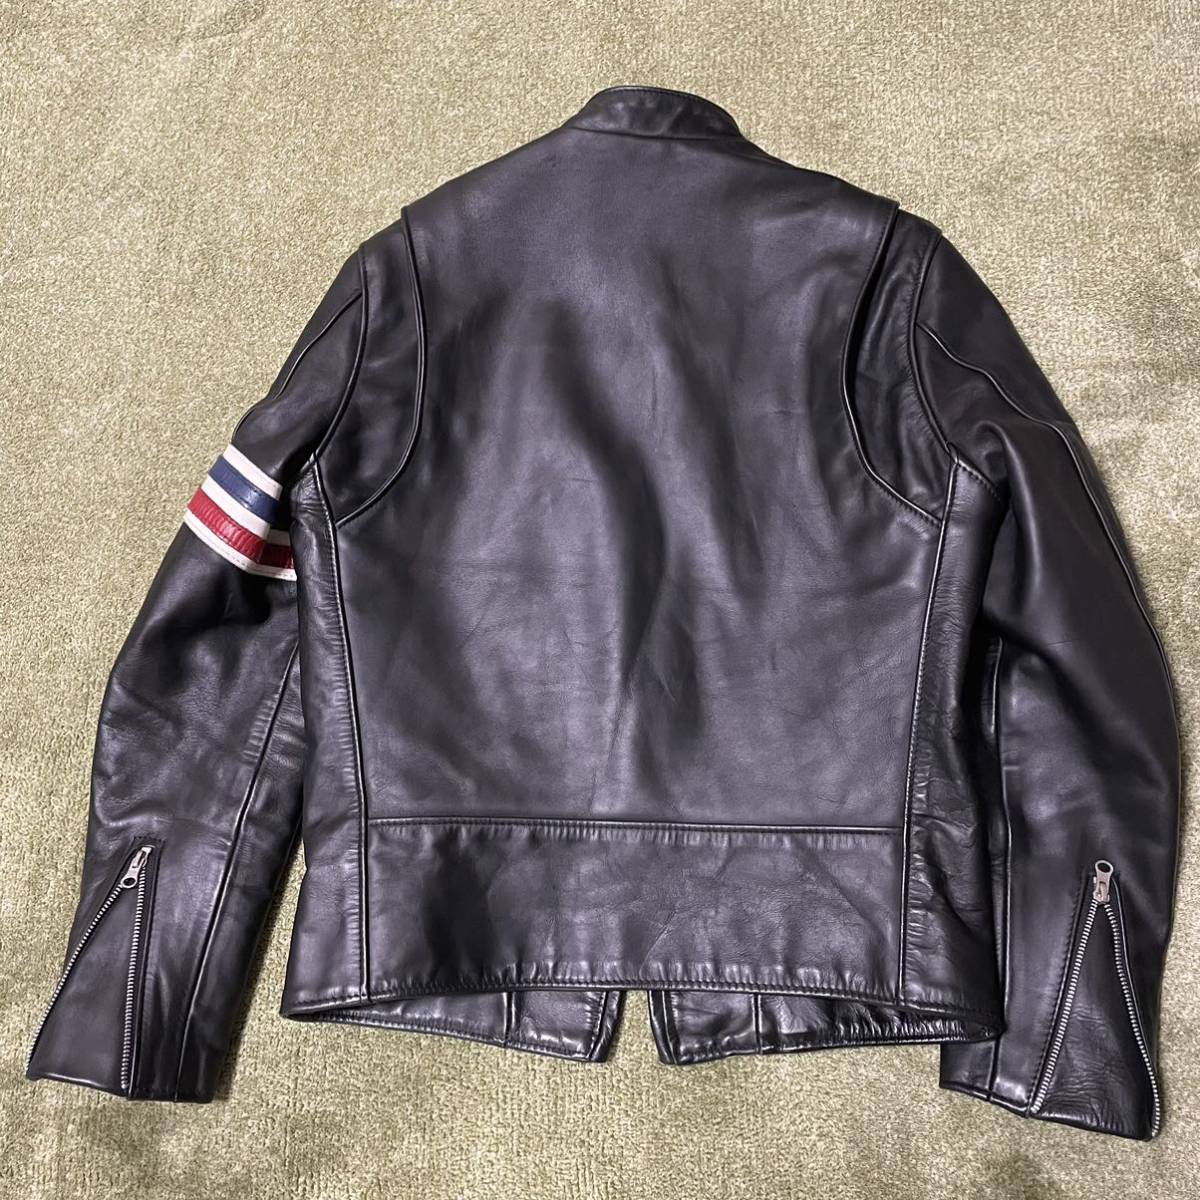 Schott 7165 Single Riders Jacket 36 Cowhide Black Lether New EASY RIDER